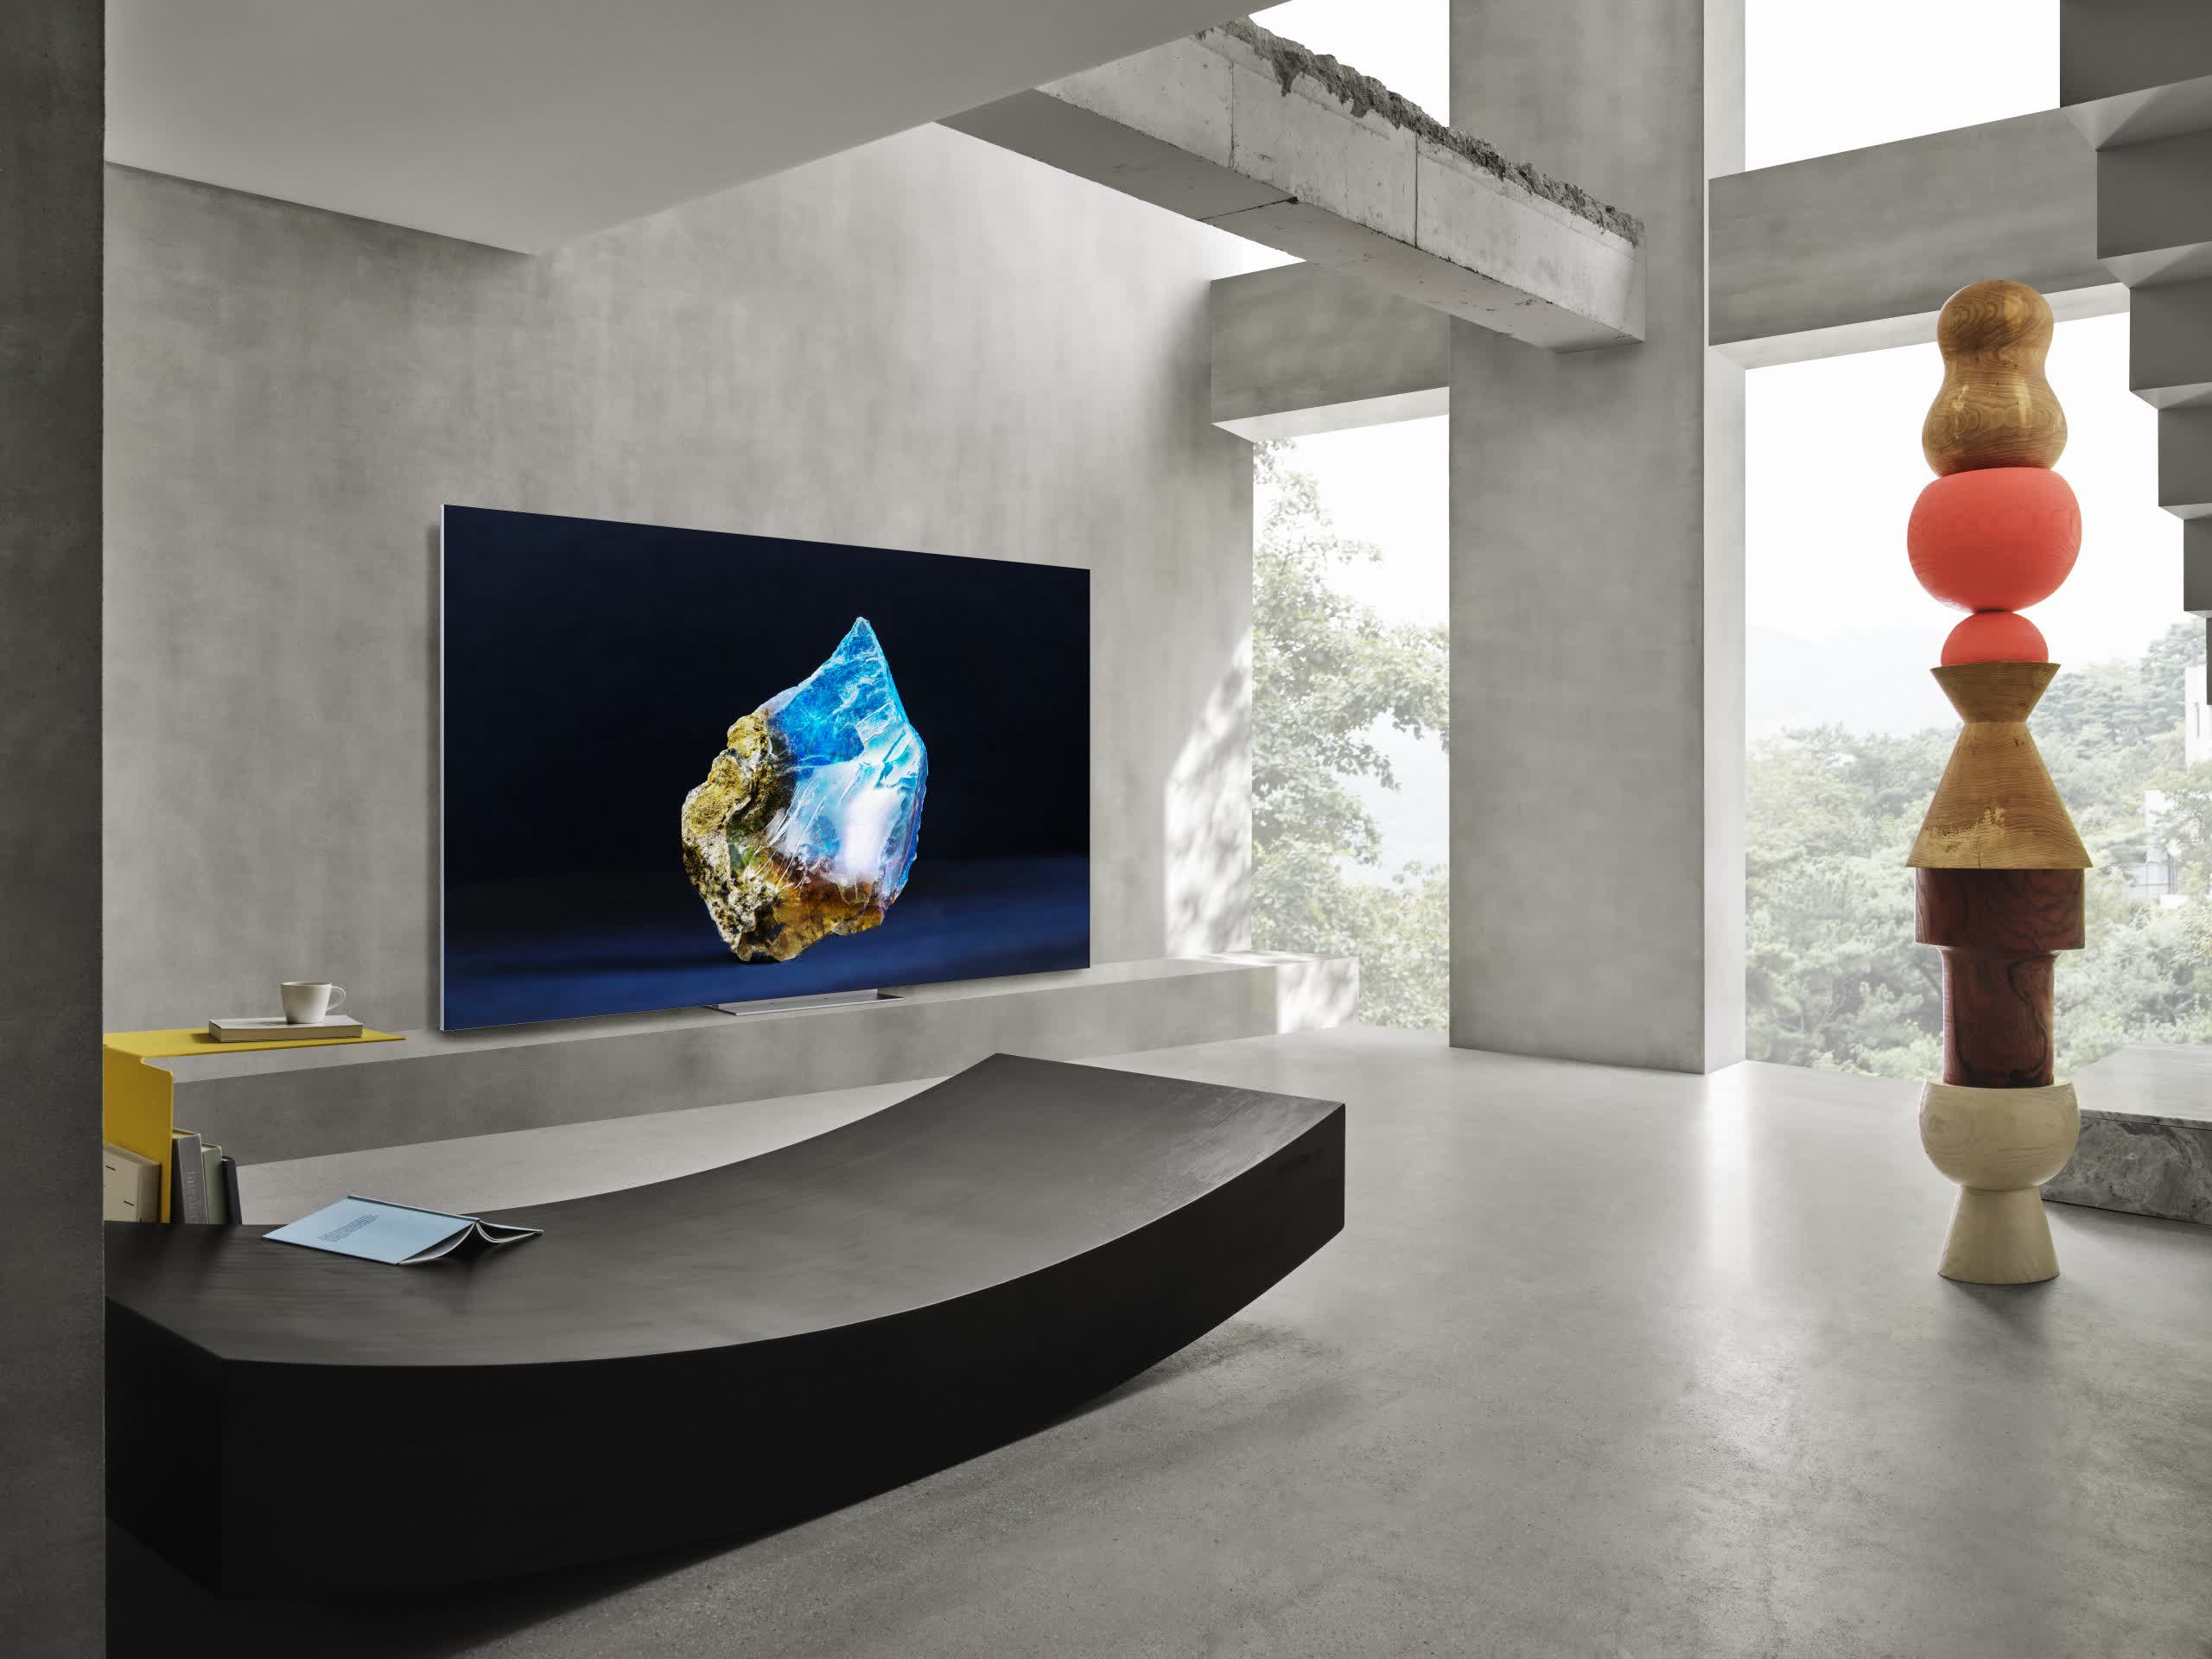 Samsung's 2023 TV lineup includes a 2,000-nit 77-inch QD-OLED, an 8K MicroLED, and a 4,000-nit Neo QLED